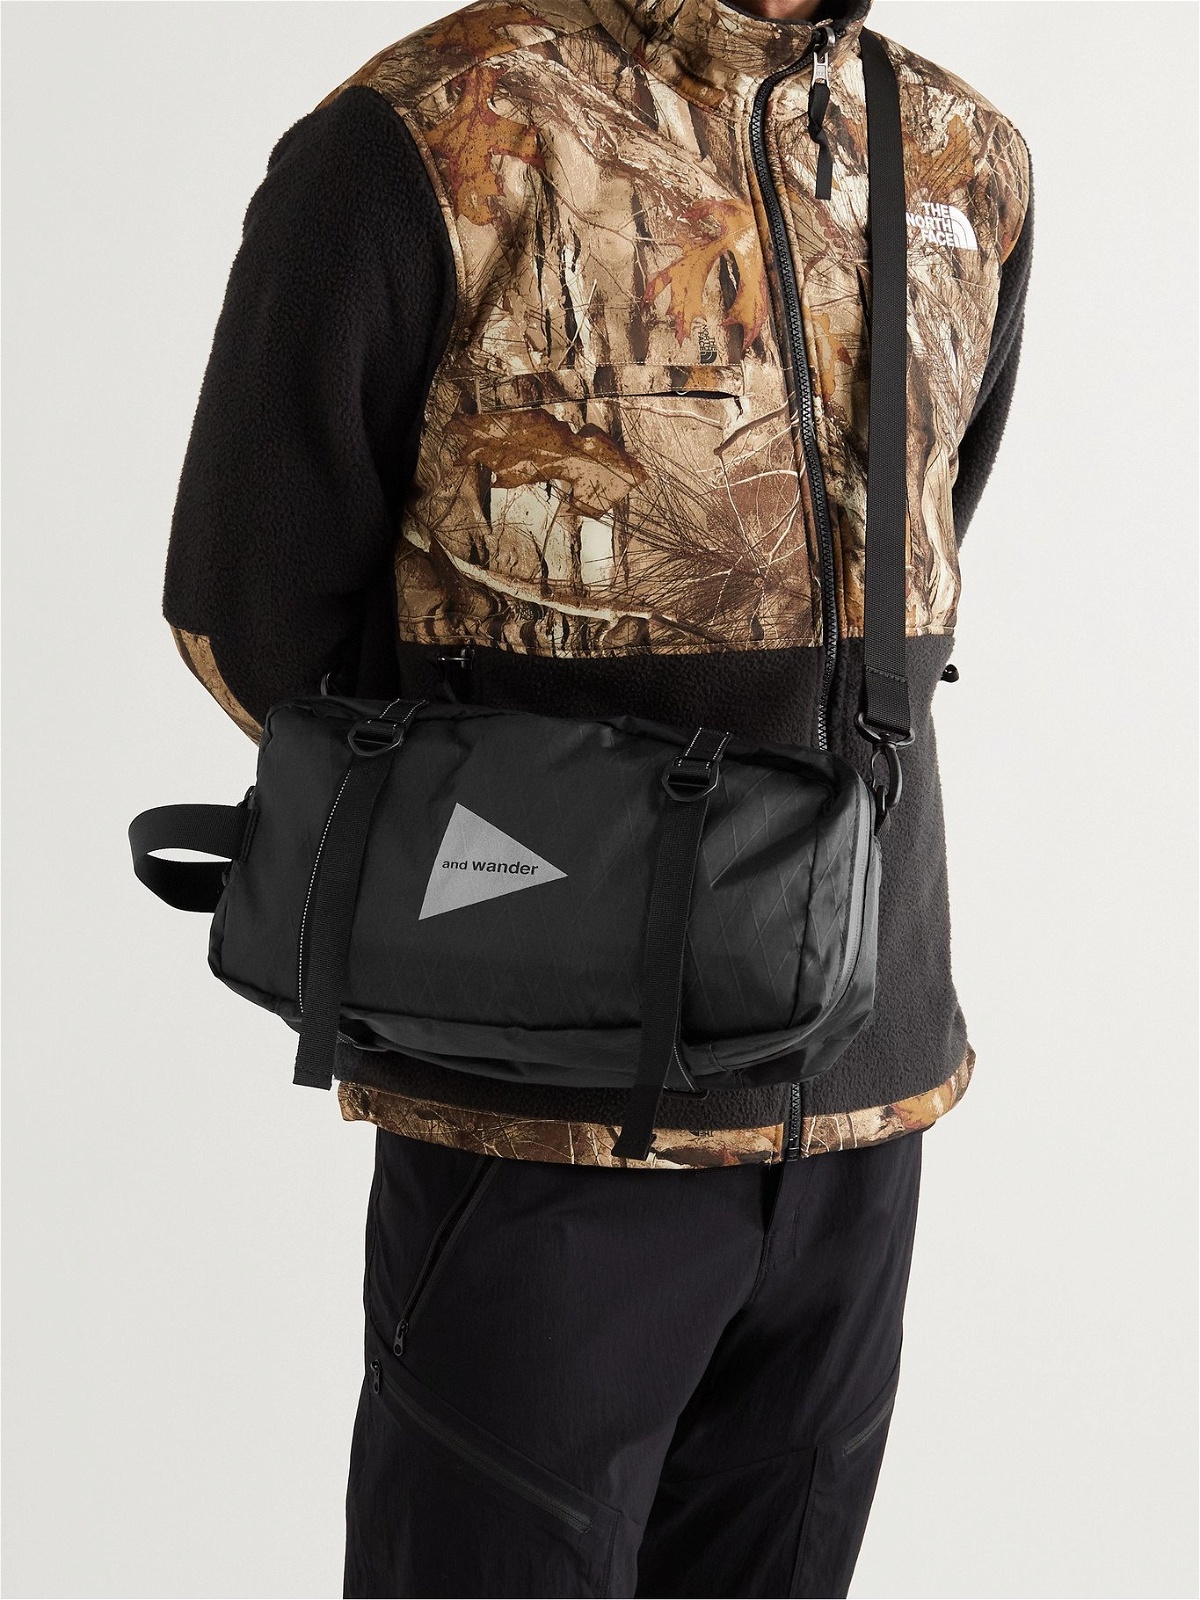 AND WANDER - X-Pac Ripstop Messenger Bag and Wander